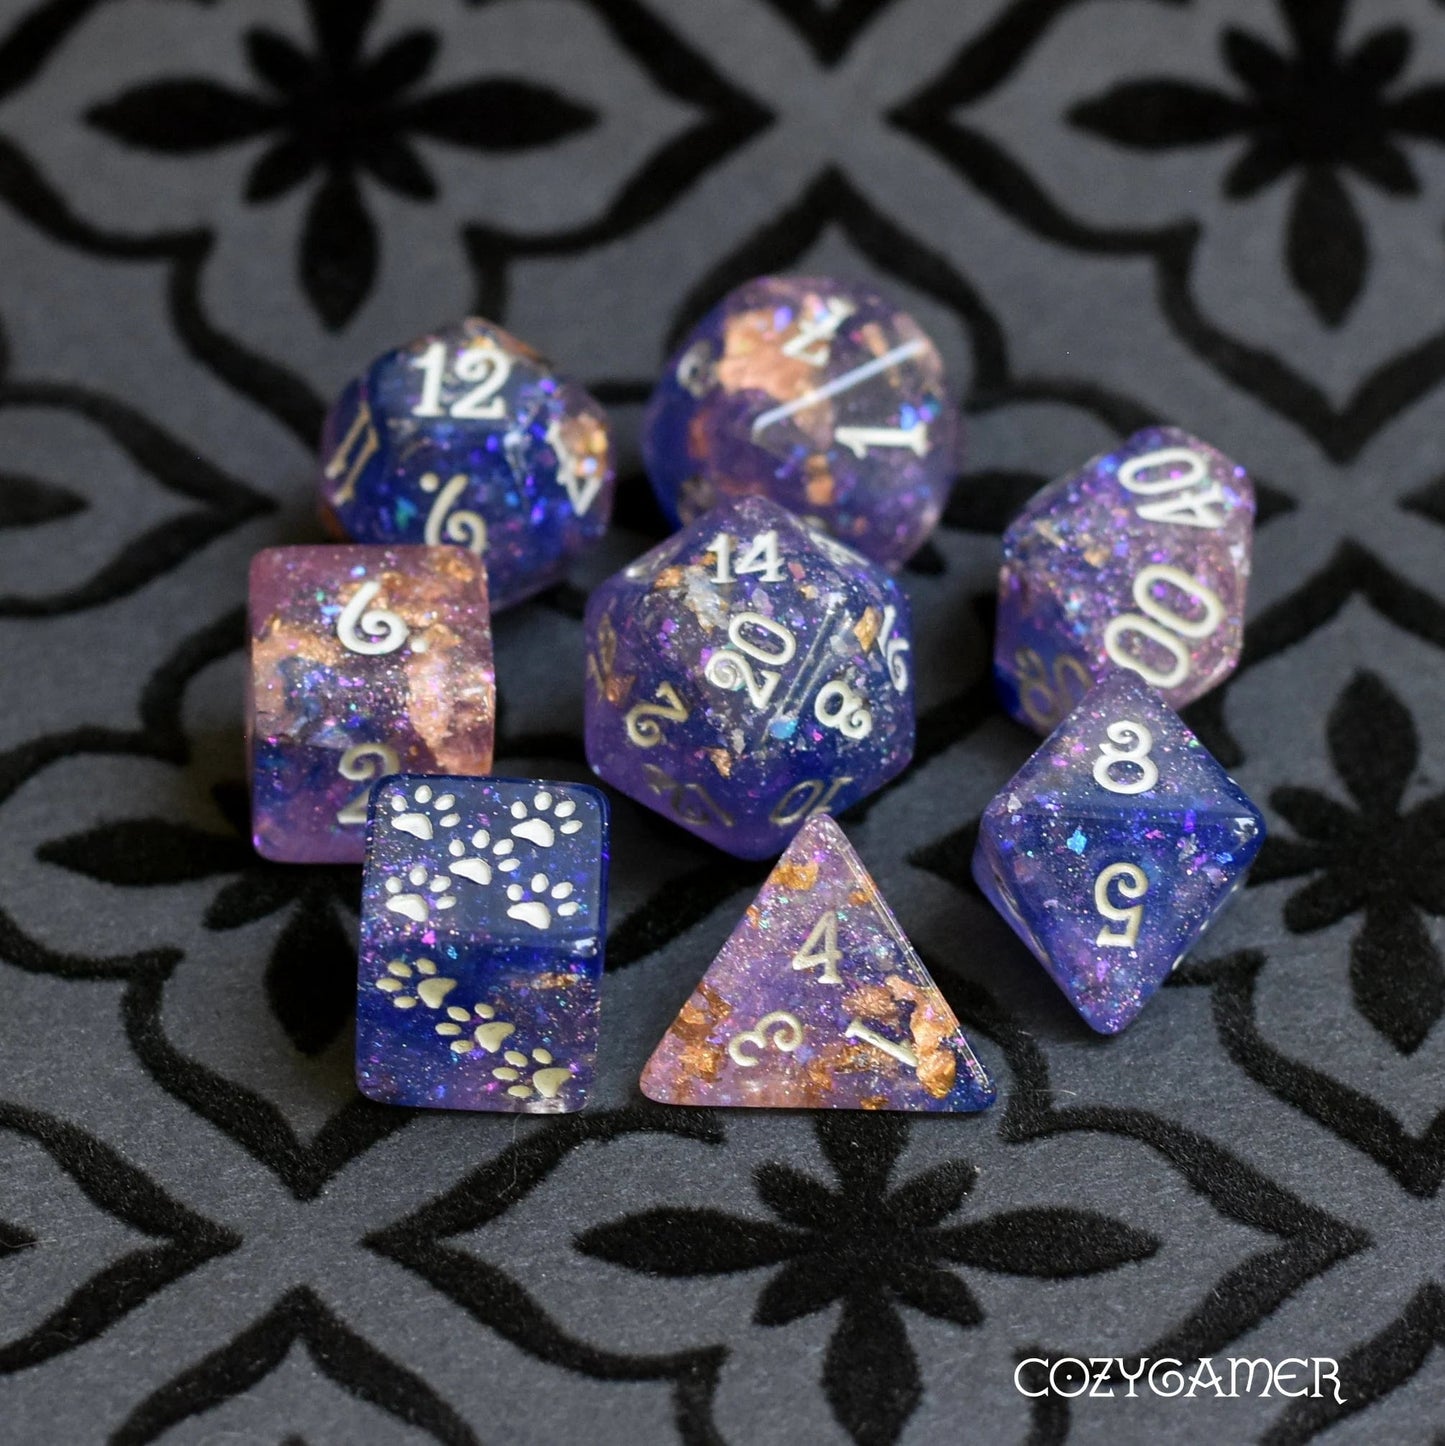 Psychic Blade - 8 Dice Set - The Fourth Place